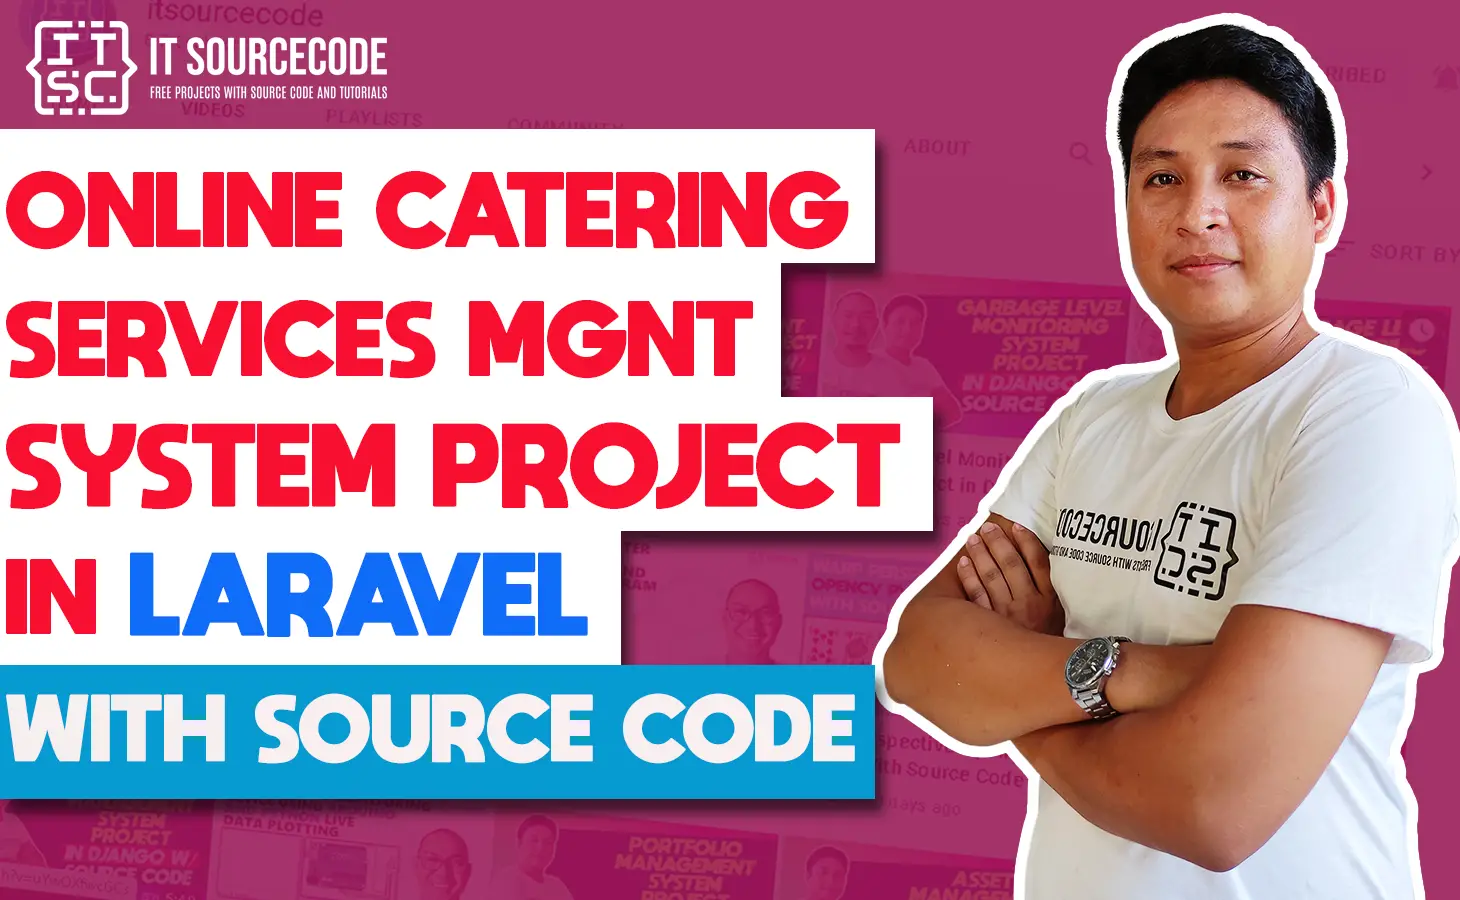 Online Food Catering Services Management System Project in Laravel